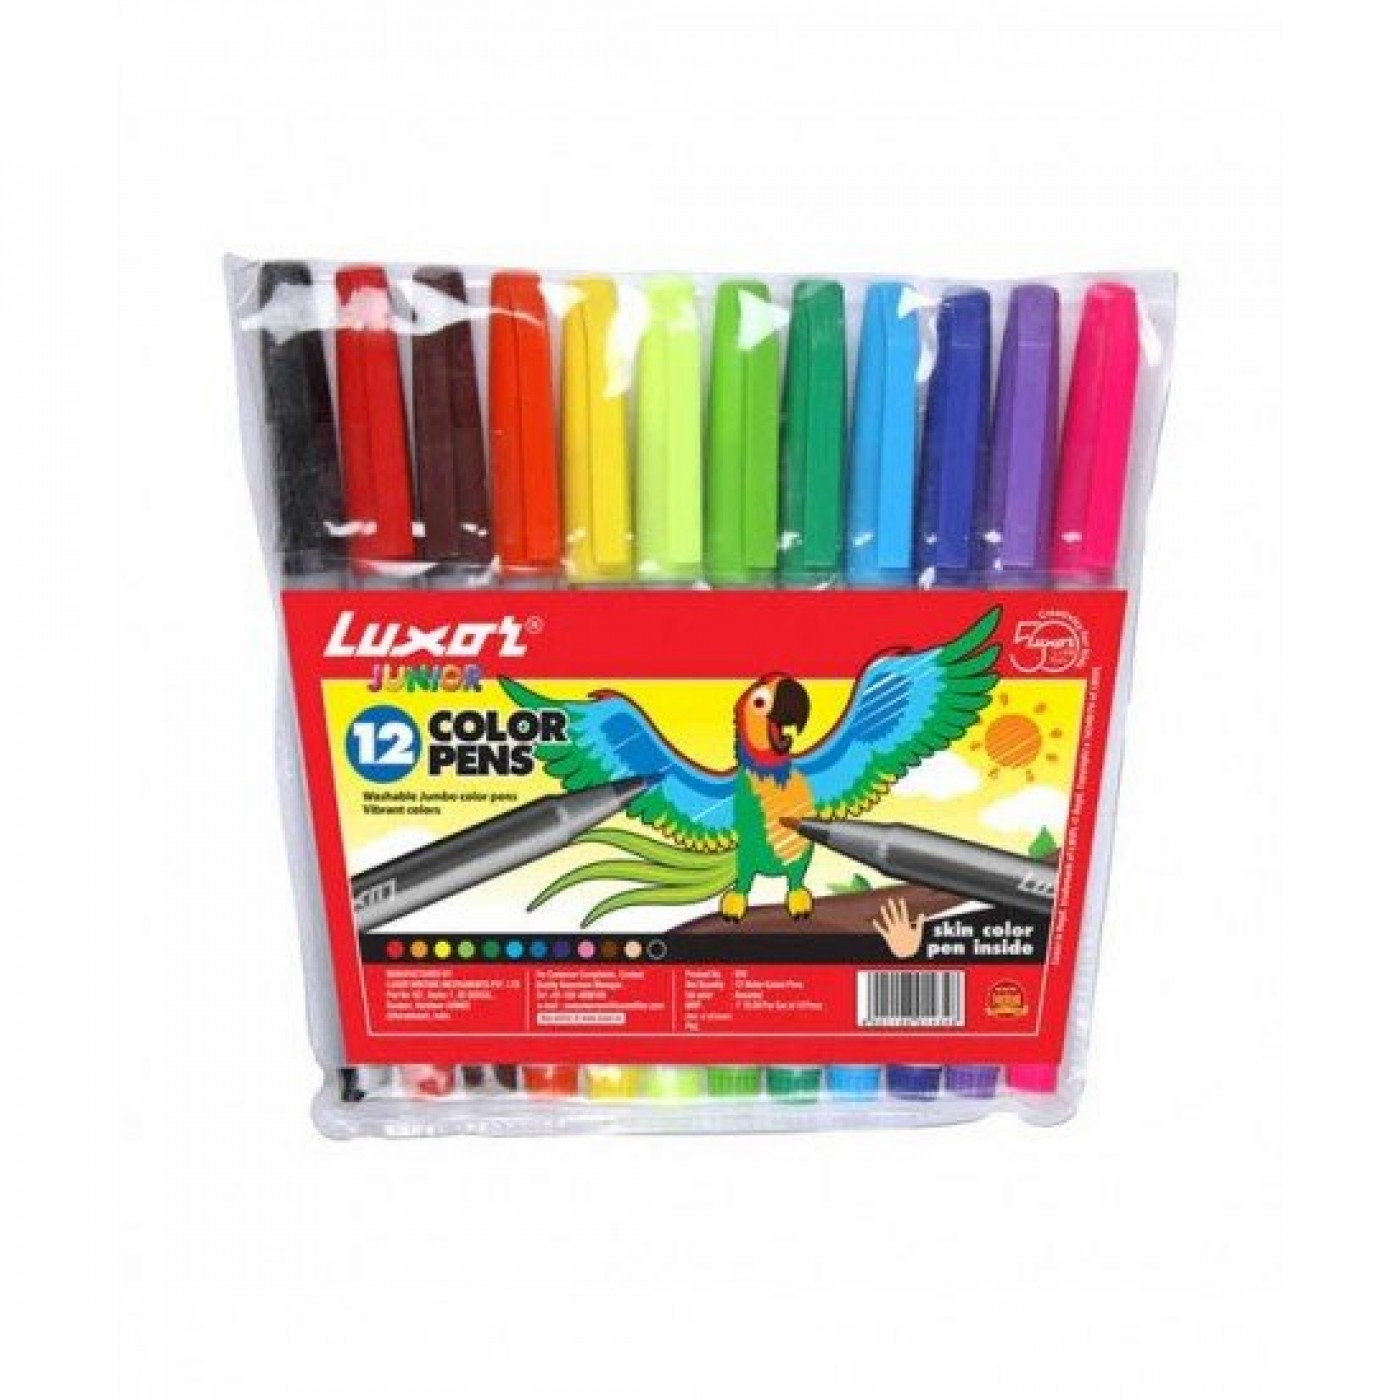 htconline.in| Maped Color'Peps Long Life Sketch Pen Set of 24 |Sketch Pens|  htconline.in